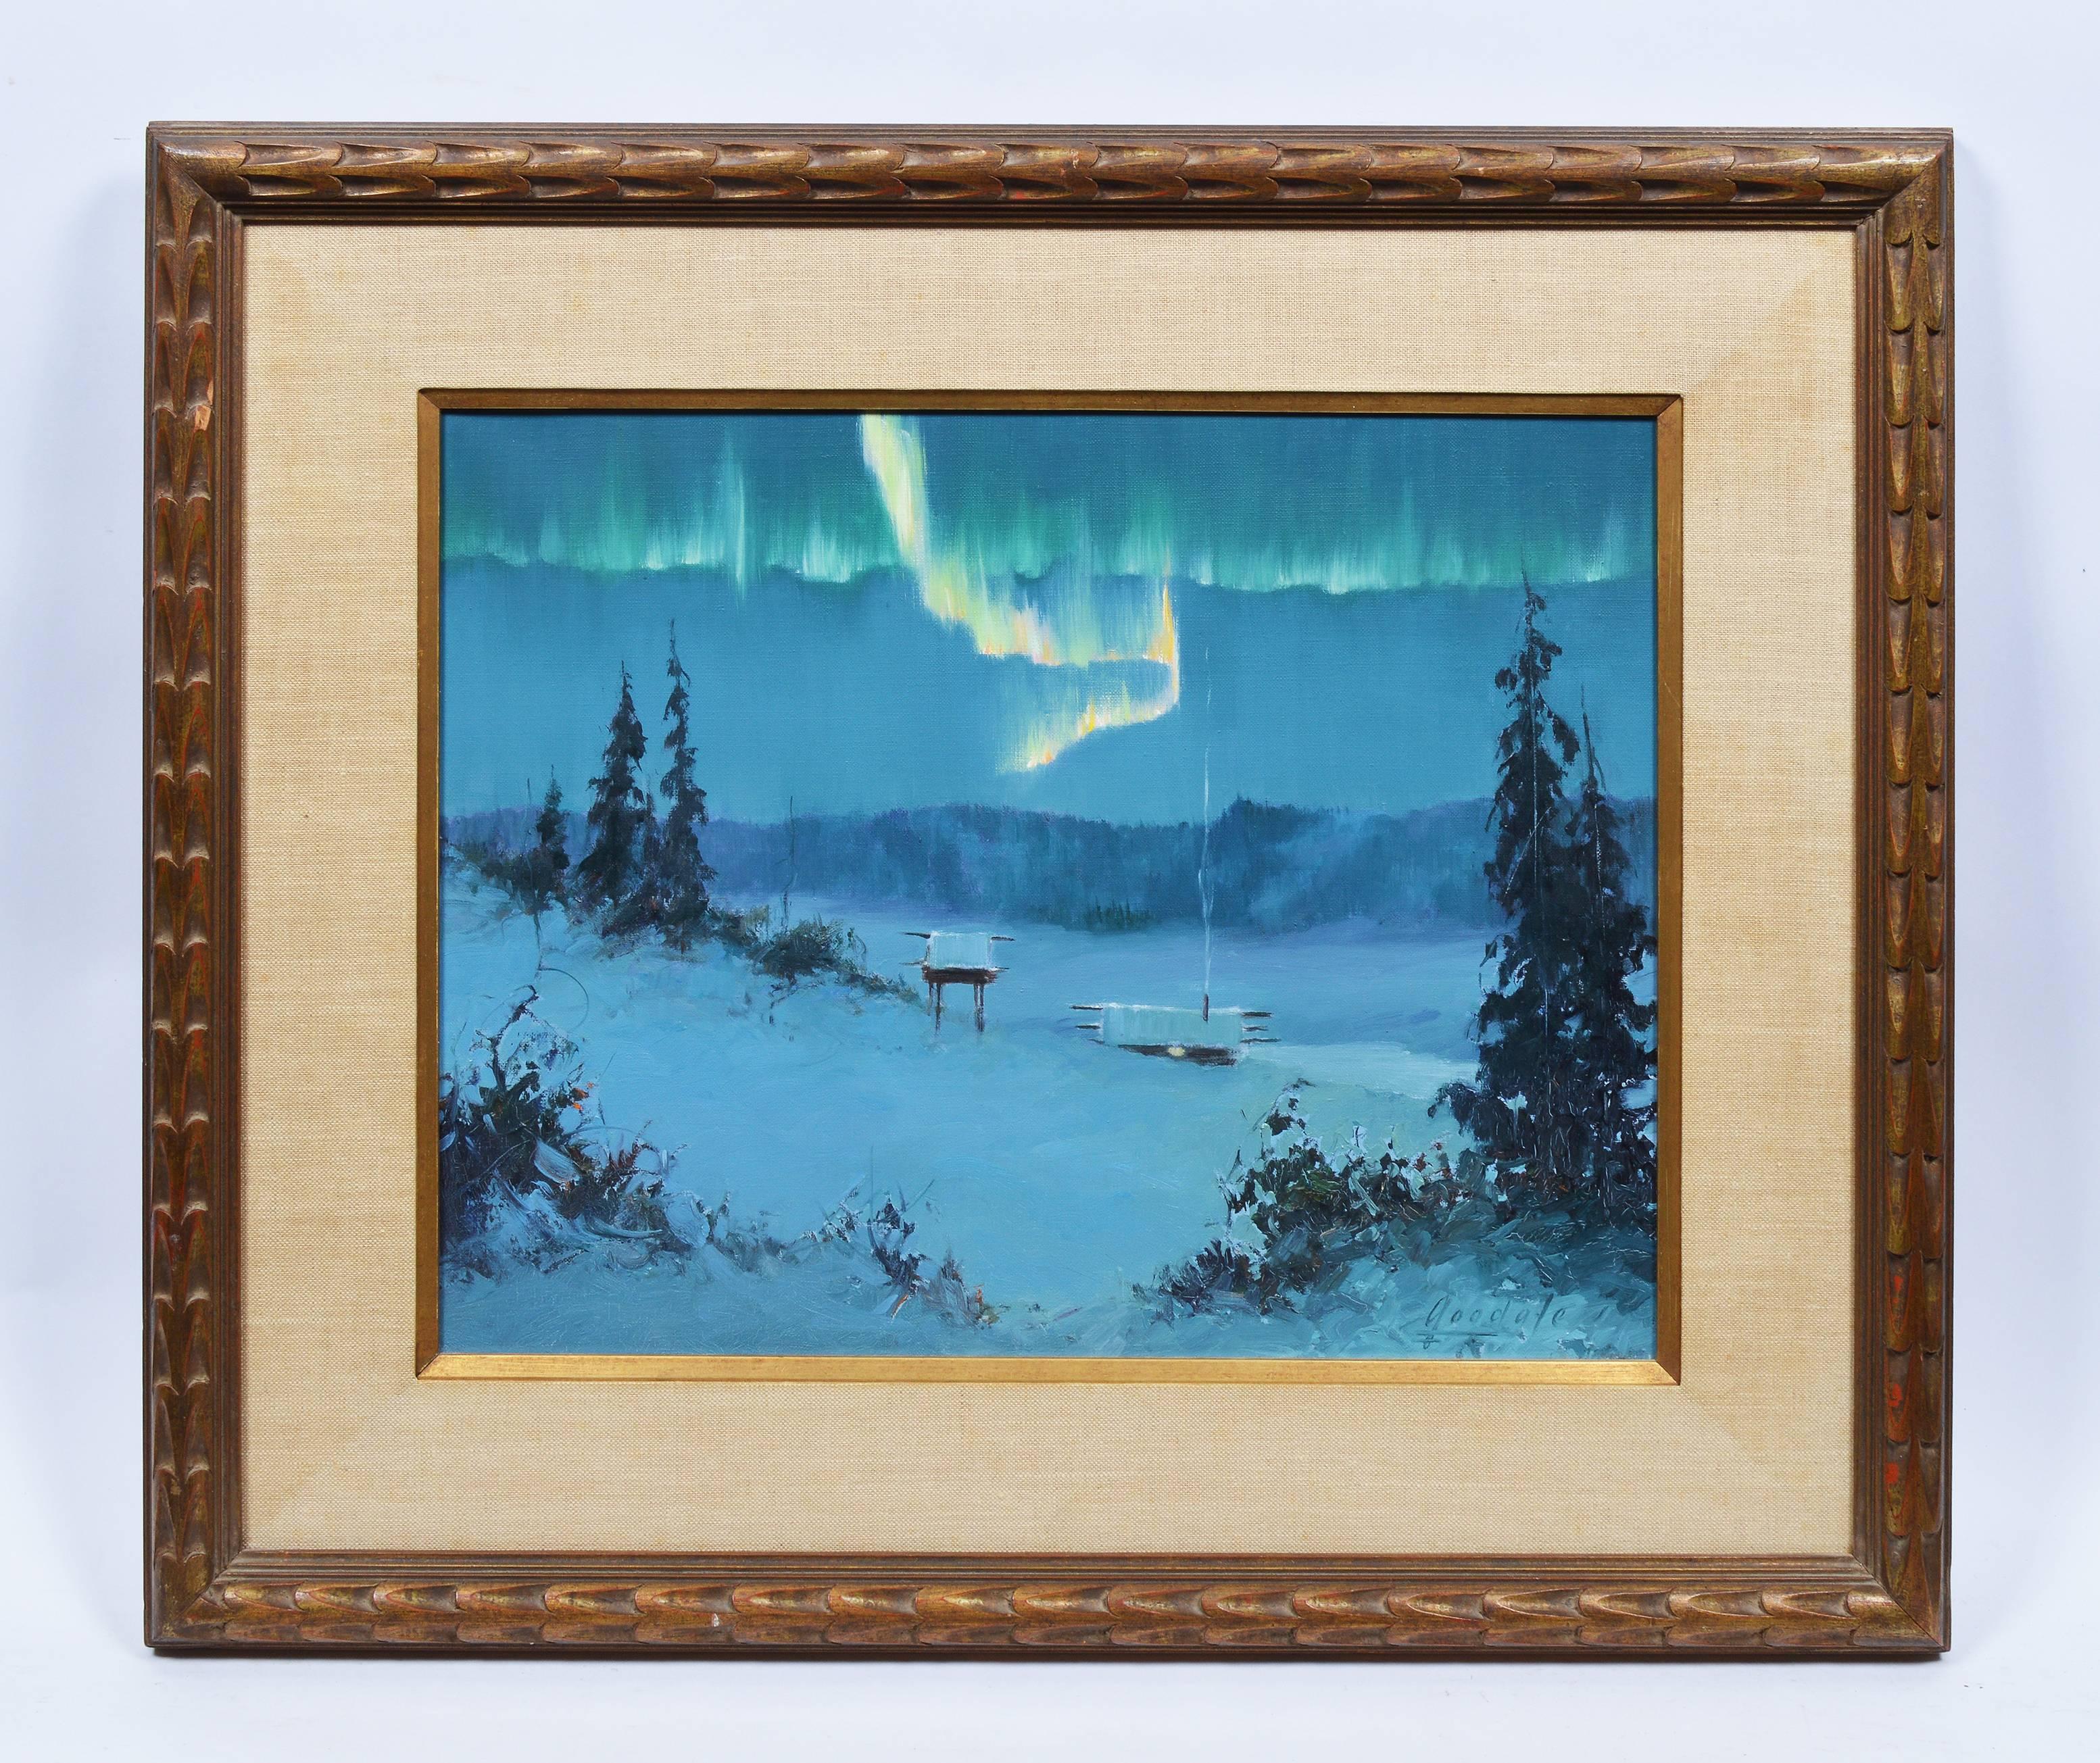 An impressionist landscape of the northern lights in Alaska by Ellen Goodale (1915-1991).  Finely executed with exceptional depth and color.  A rare subject.  Oil on canvas, circa 1935.  Signed lower right.  Image size, 20"L x 16"H. 